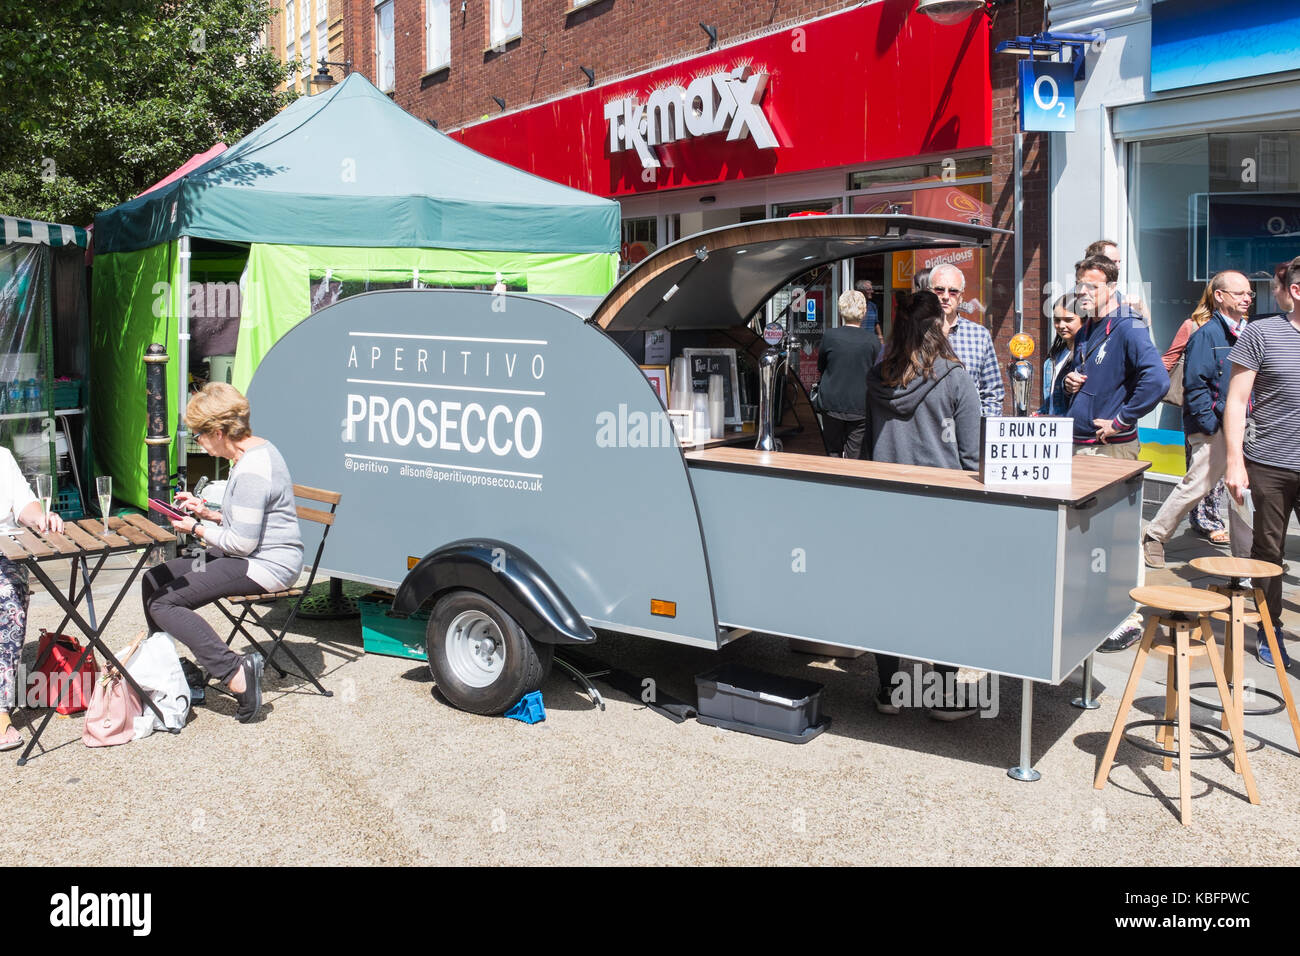 Prosecco prosecco bar Aperitivo portable à Worcester High Street Banque D'Images